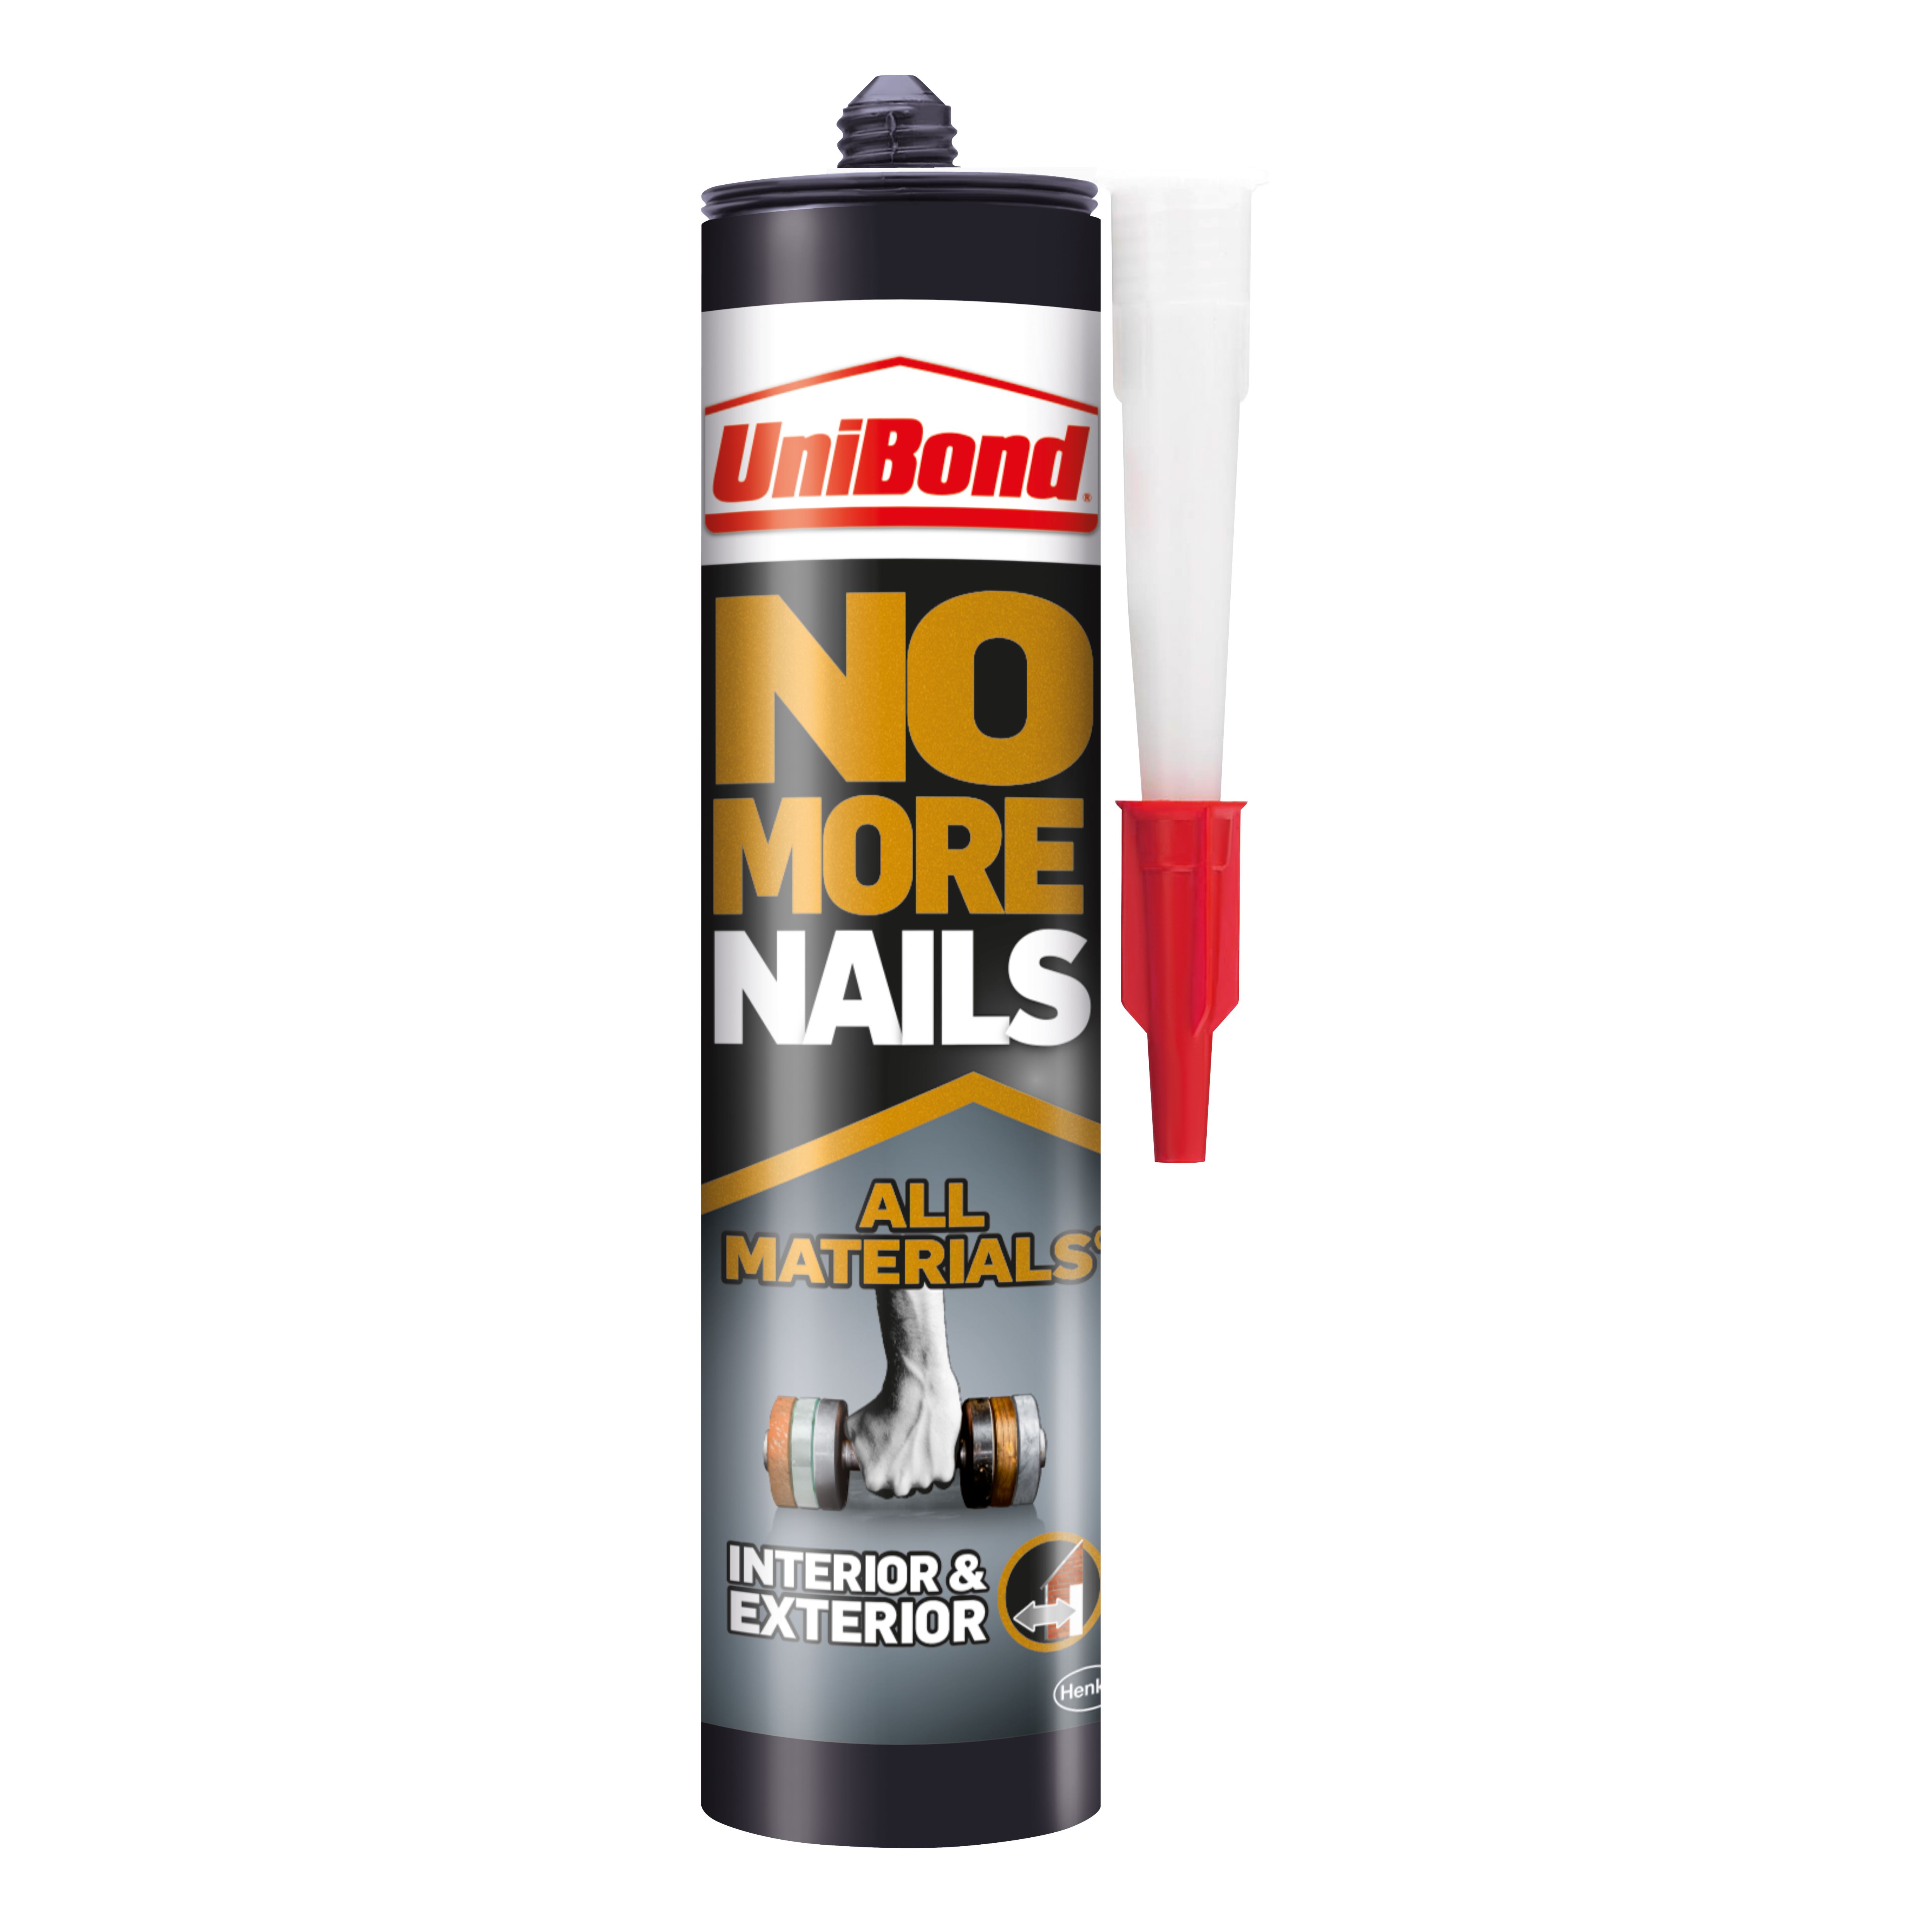 UniBond No More Nails Cartridge Interior & Exterior Water resistant Solvent-free White All materials Grab adhesive 0.39kg